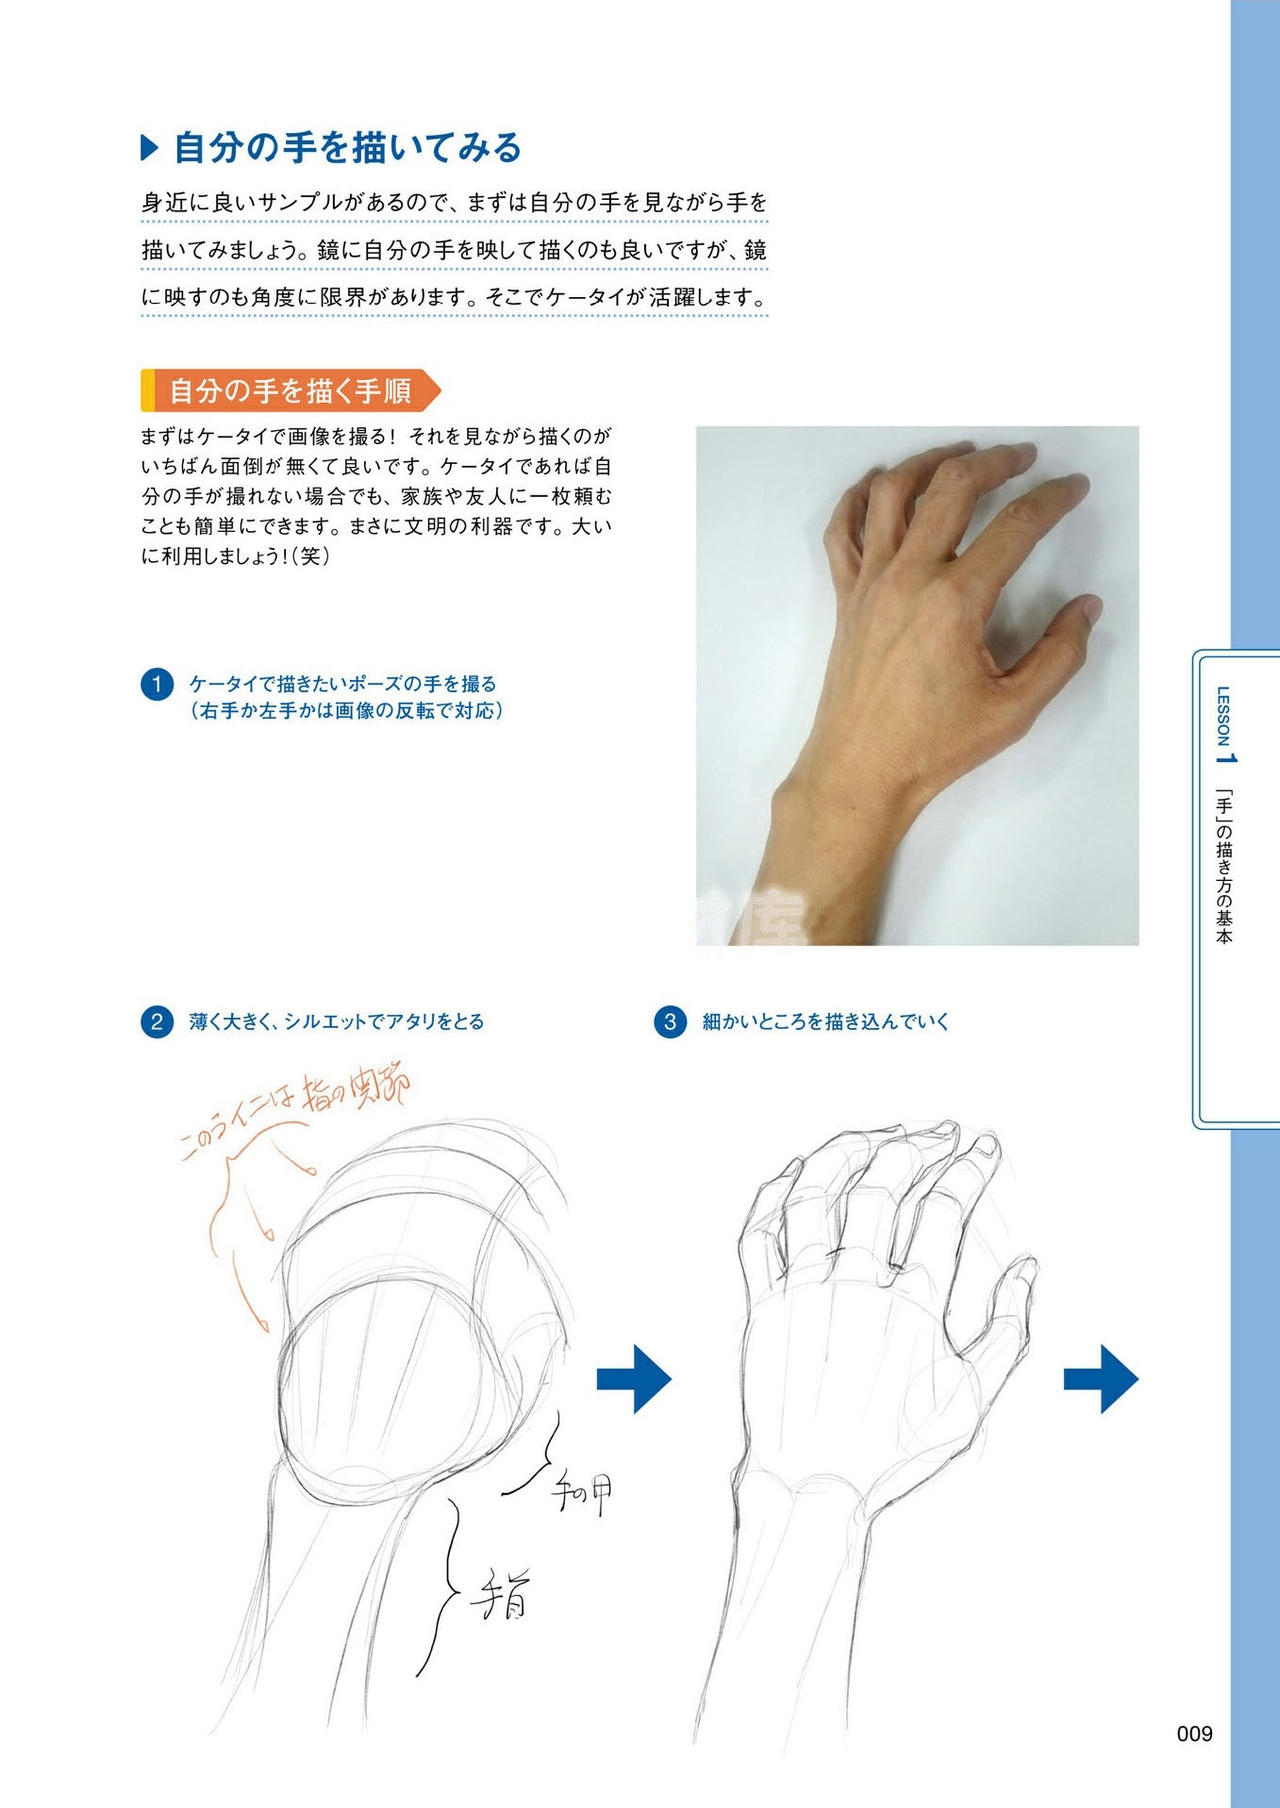 How to draw hands 9